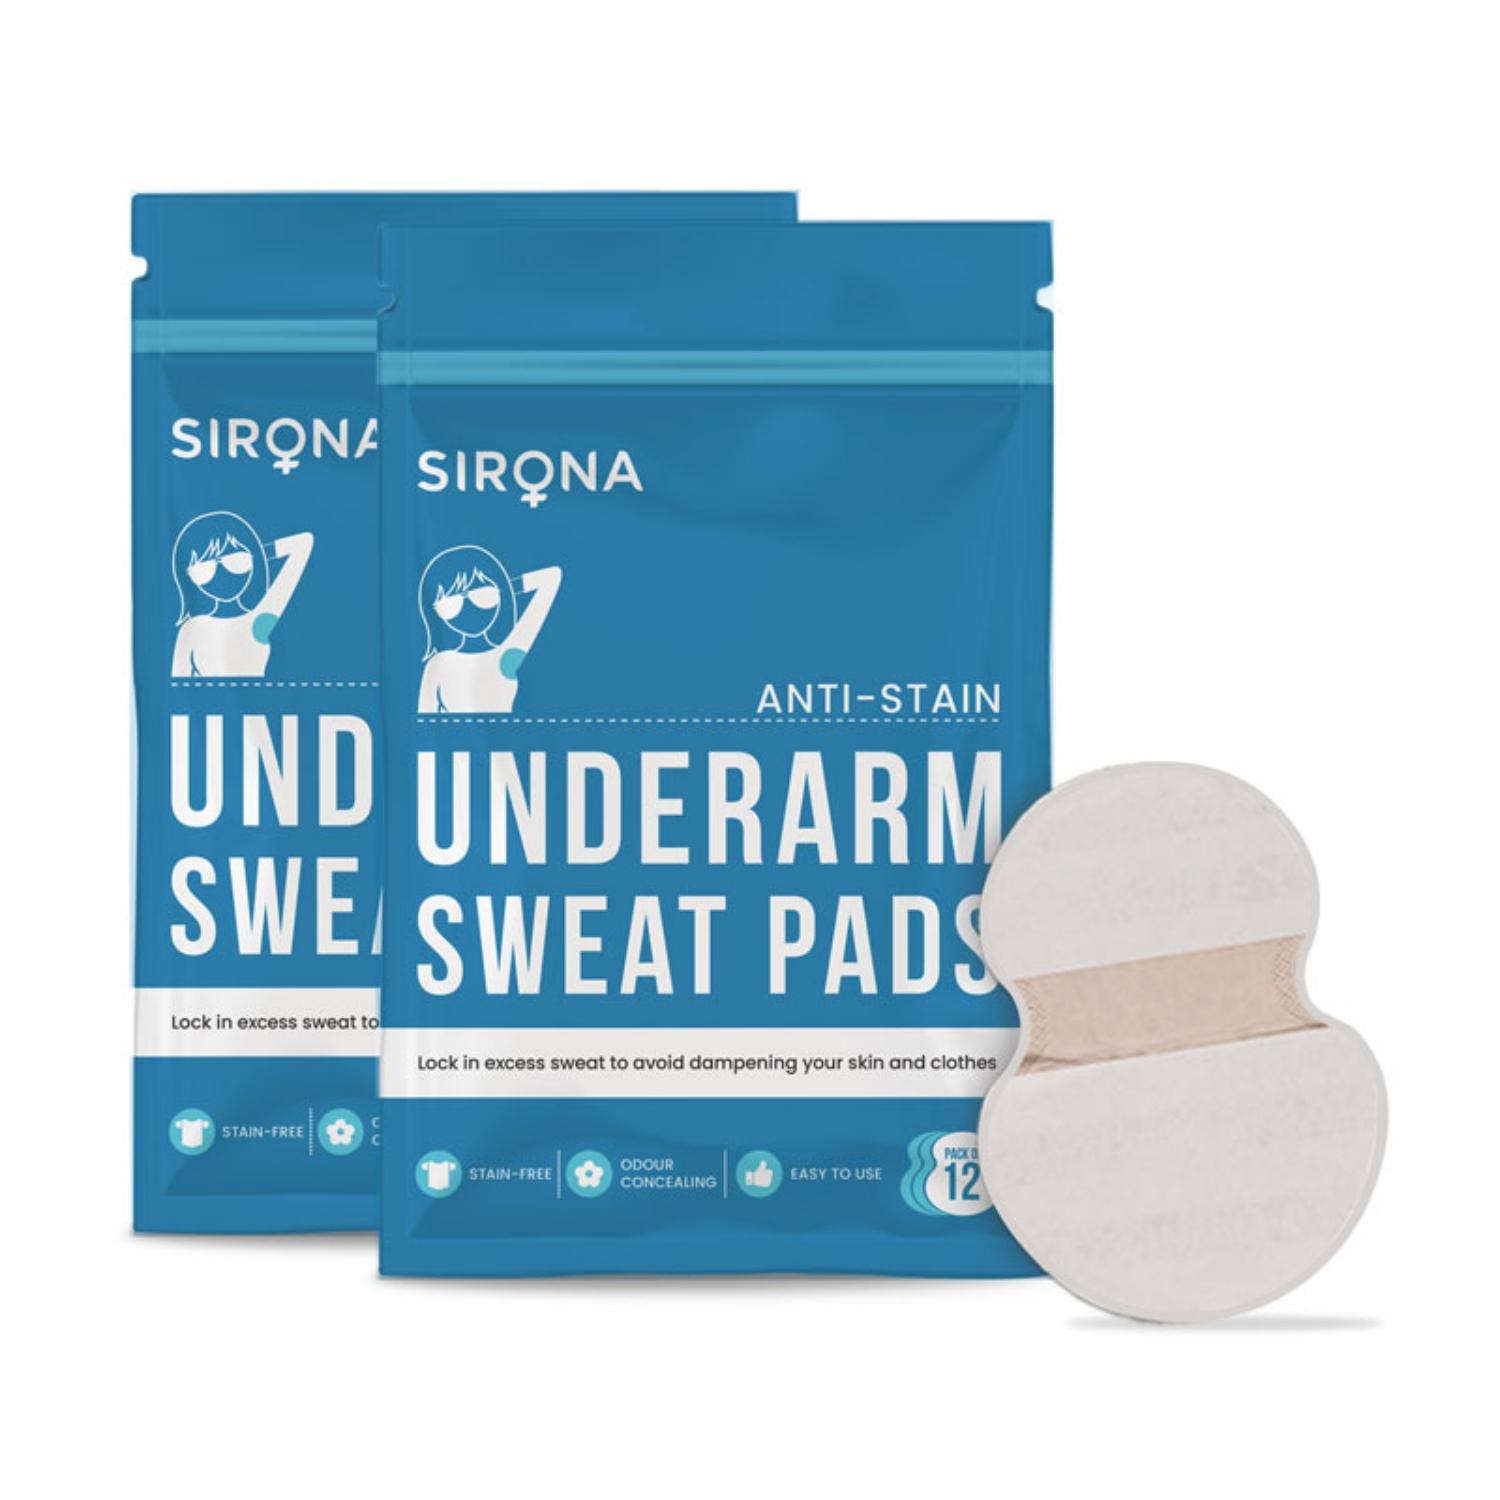 Sirona | Sirona Under Arm Sweat Pads for Men and Women - (2 Pack - 12 Pads Each) Combo